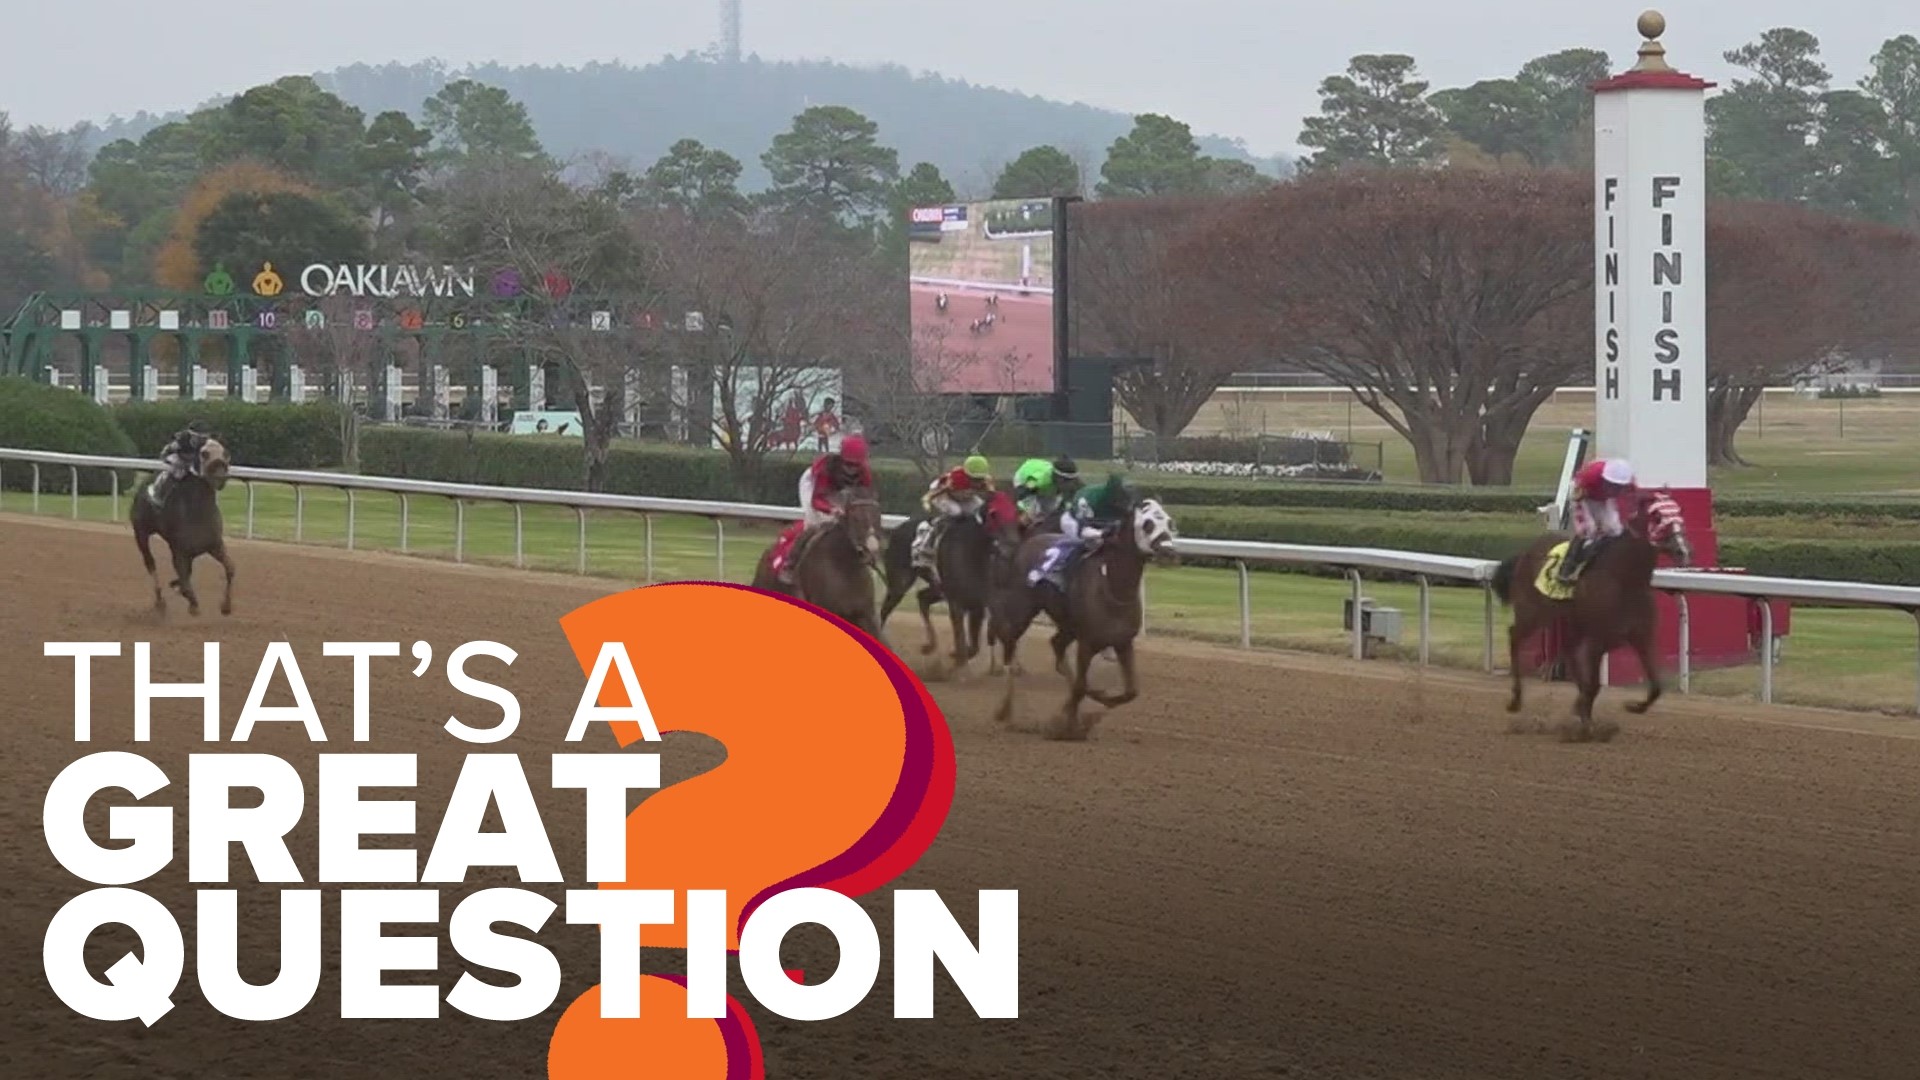 If you make a trip to Oaklawn, you may hear lots of talk about a "stakes race". We spoke with racing officials to learn exactly what that means.